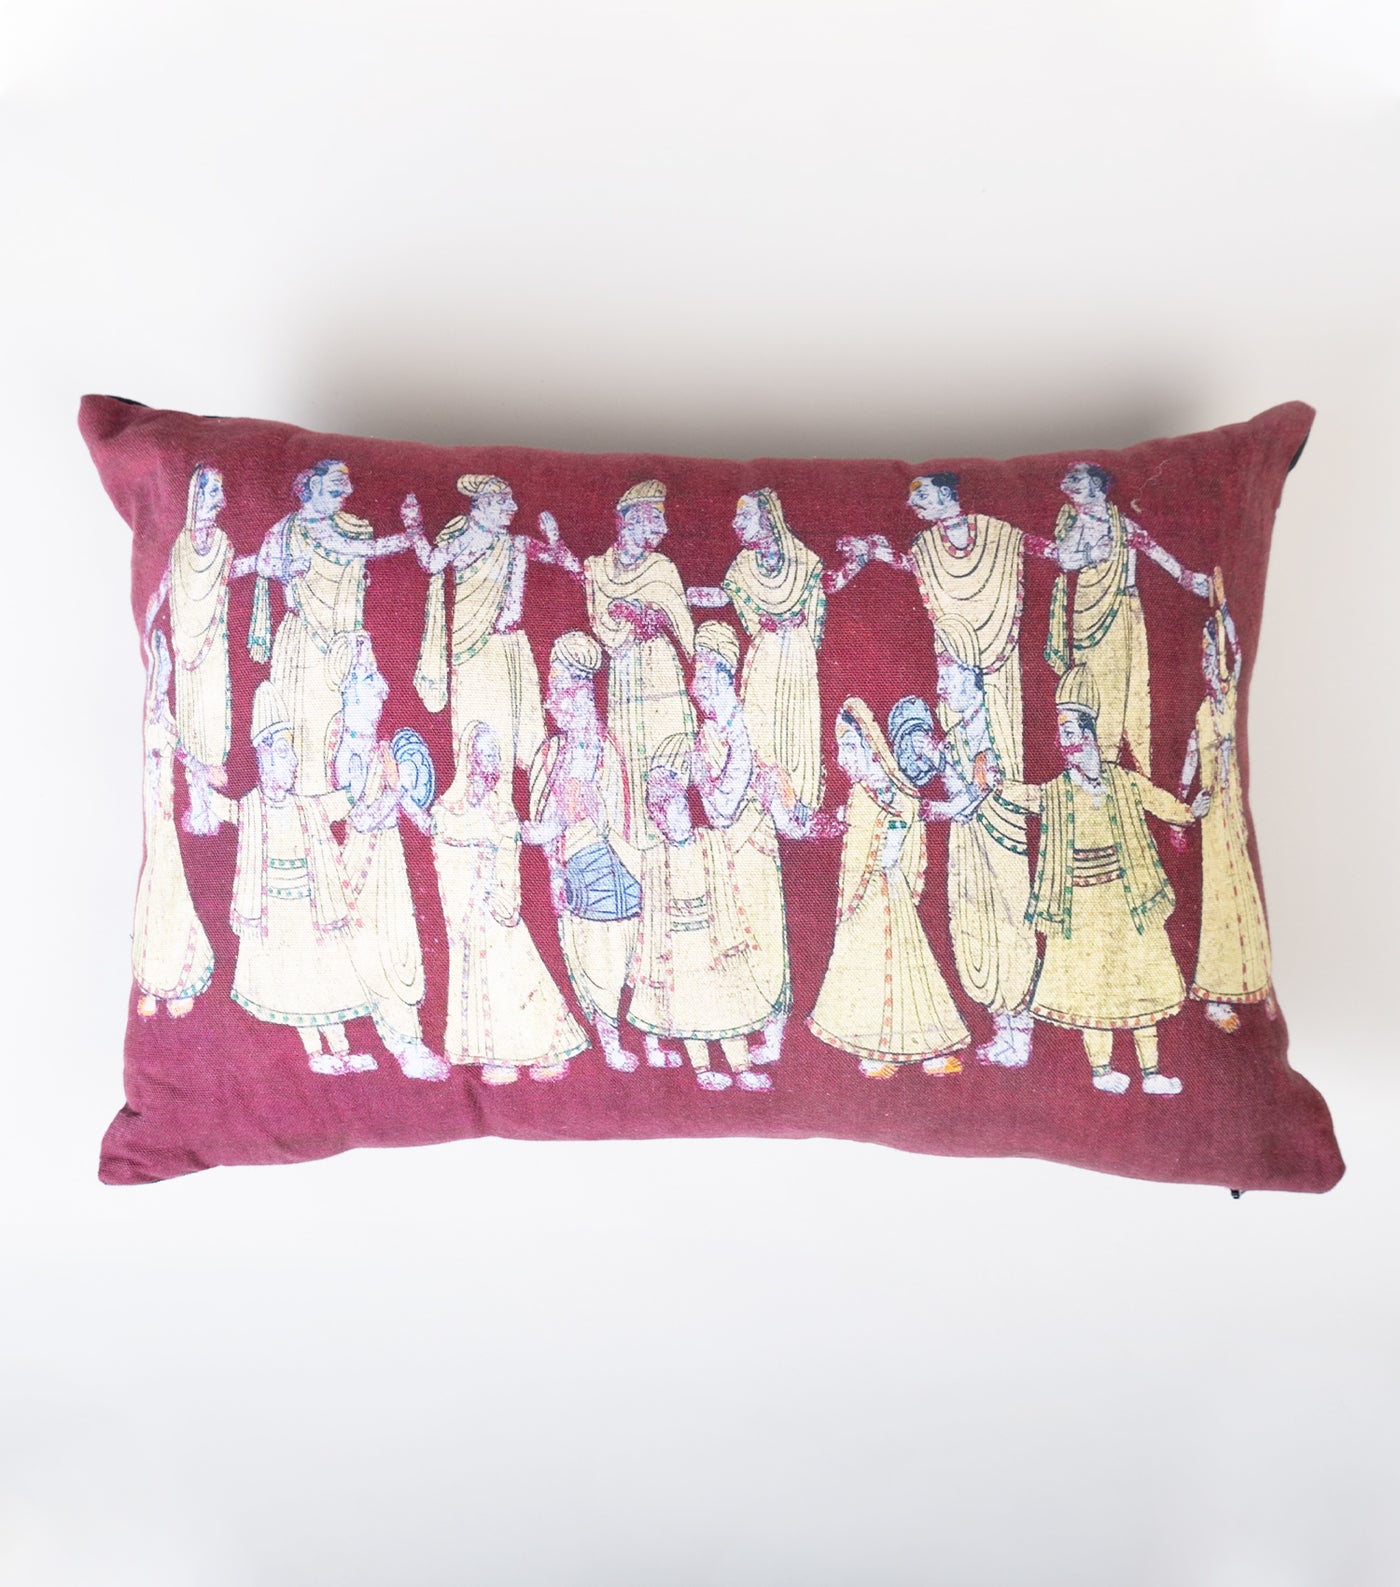 Red Printed Cotton Cushion Cover